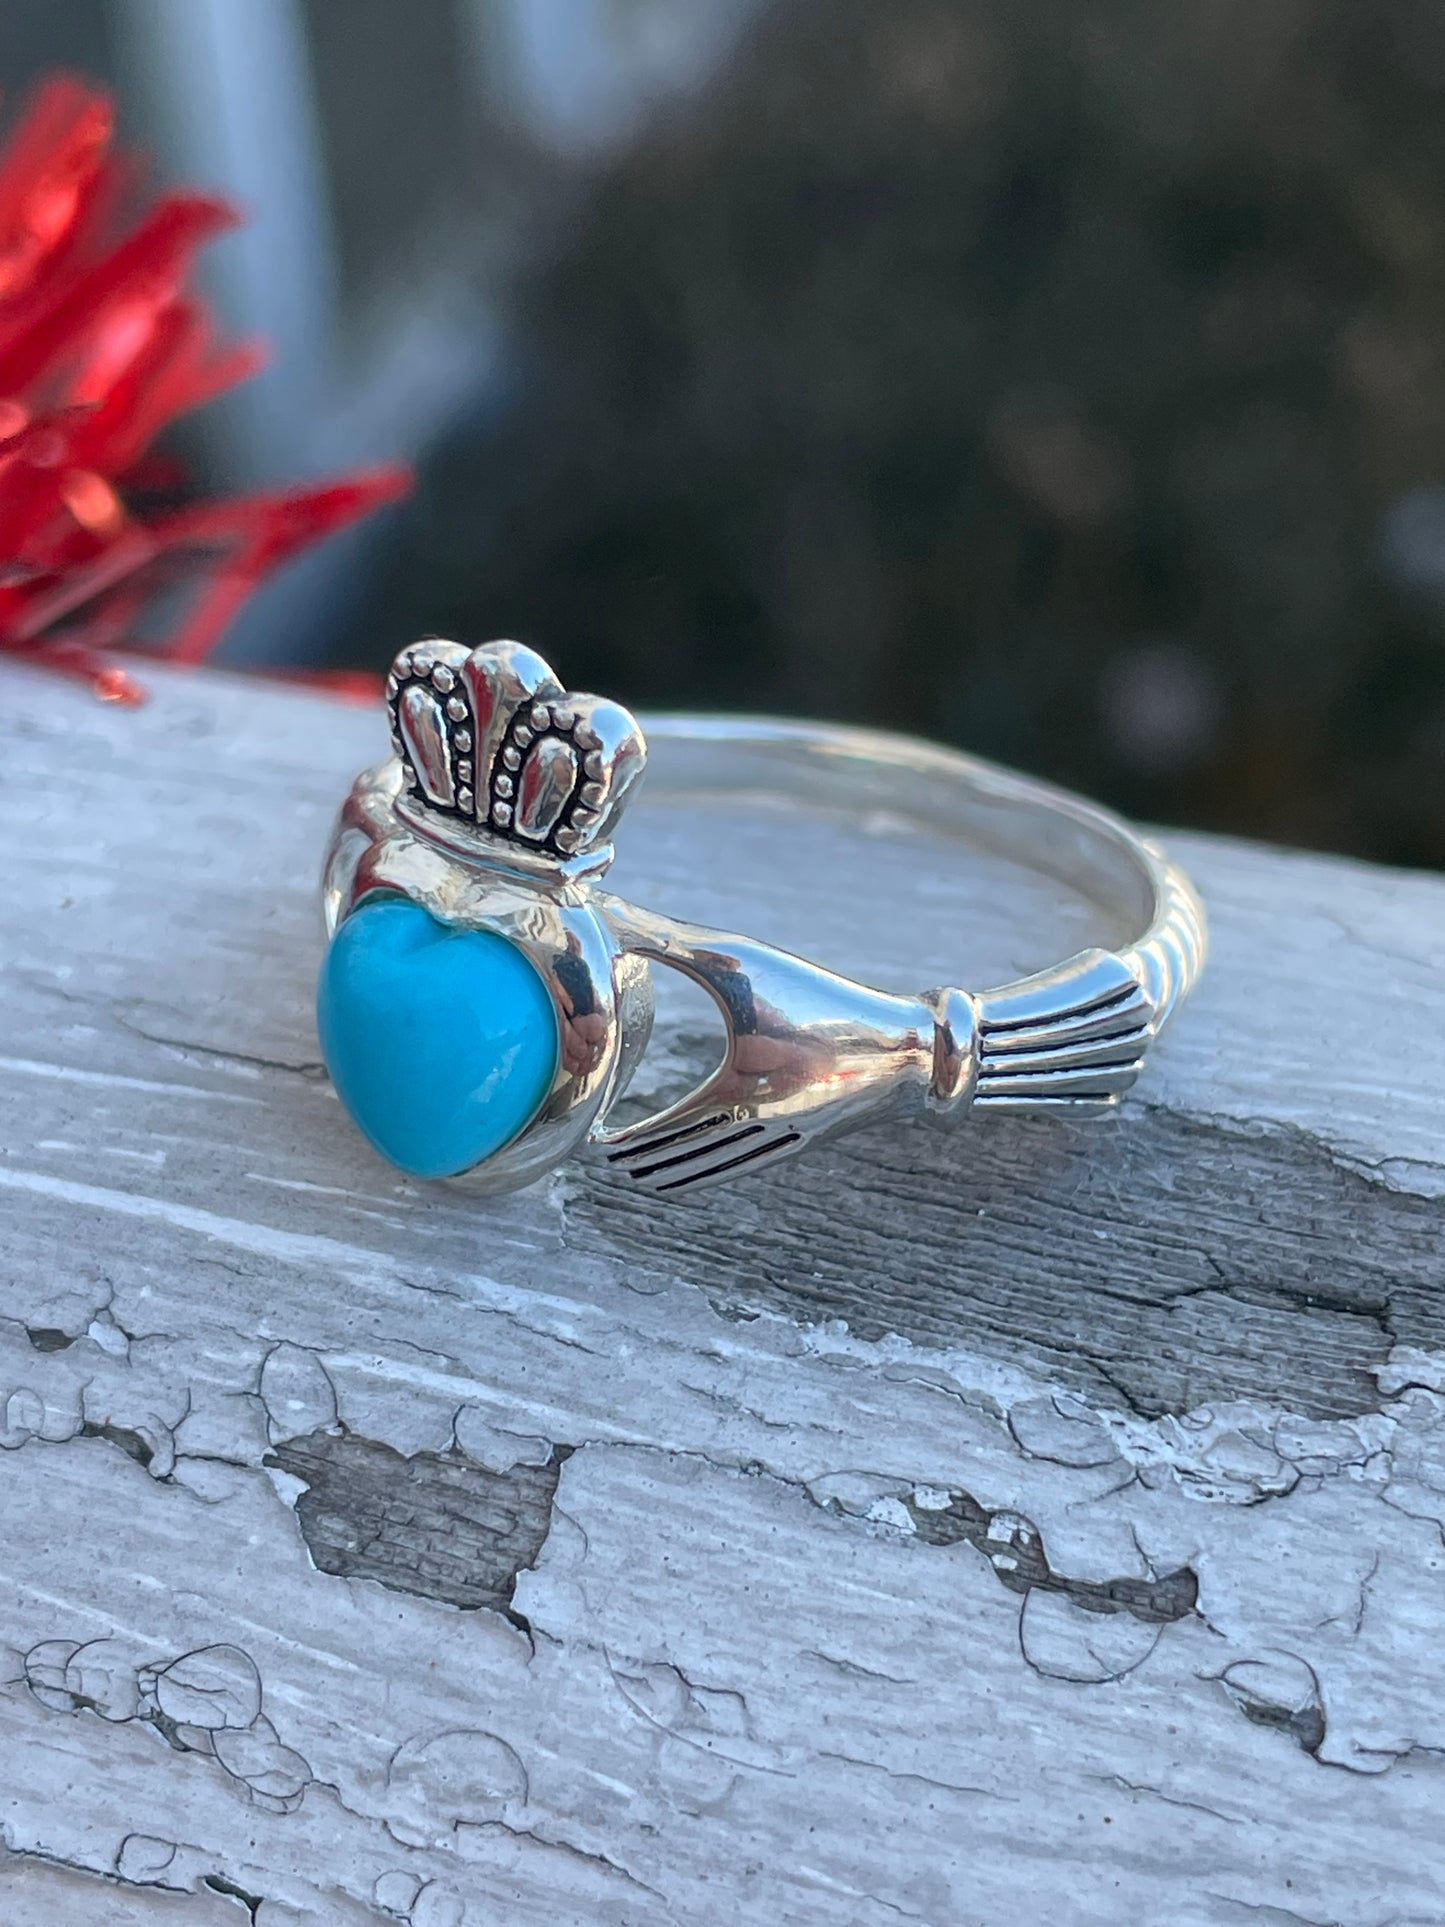 Designer JMH 925 Sterling Silver Sleeping Beauty Turquoise Claddagh Ring